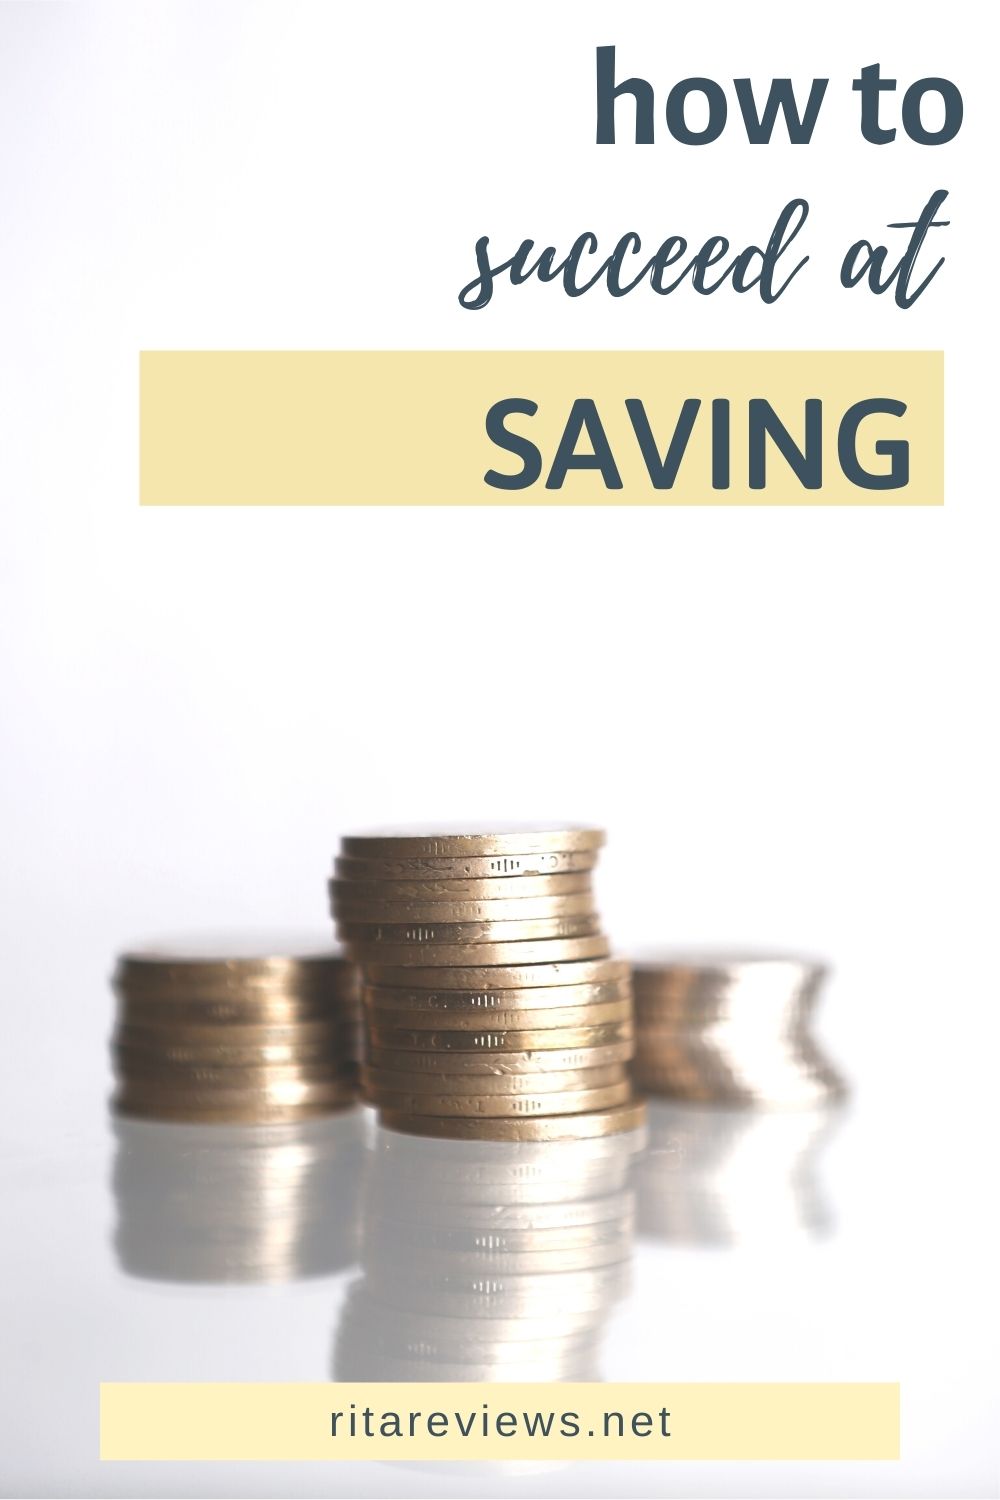 How to Succeed at Saving